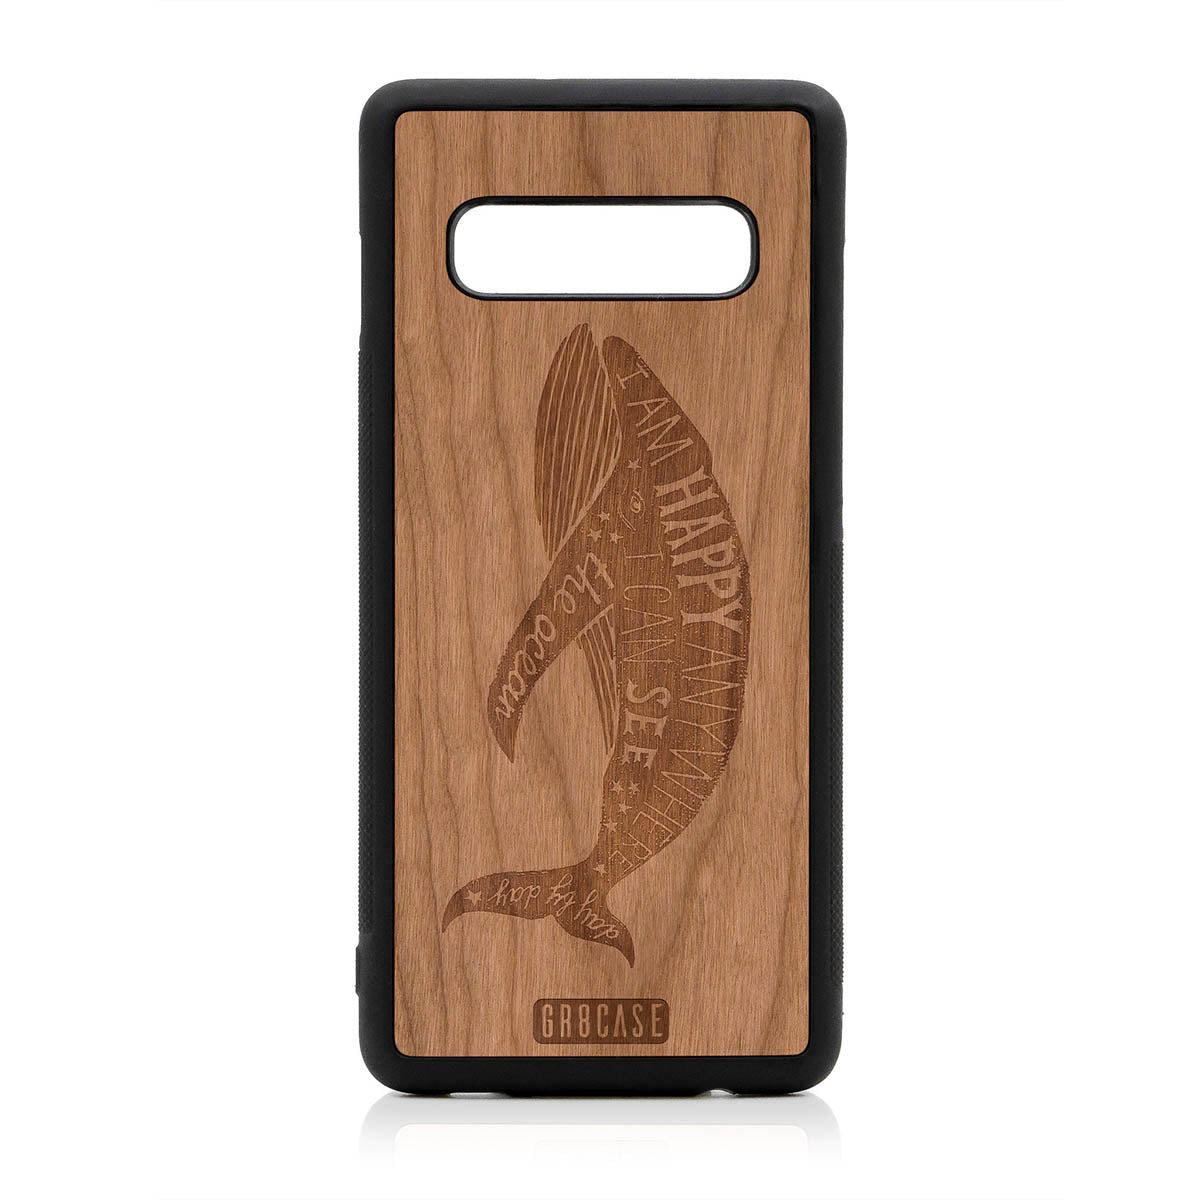 I'm Happy Anywhere I Can See The Ocean (Whale) Design Wood Case For Samsung Galaxy S10 Plus